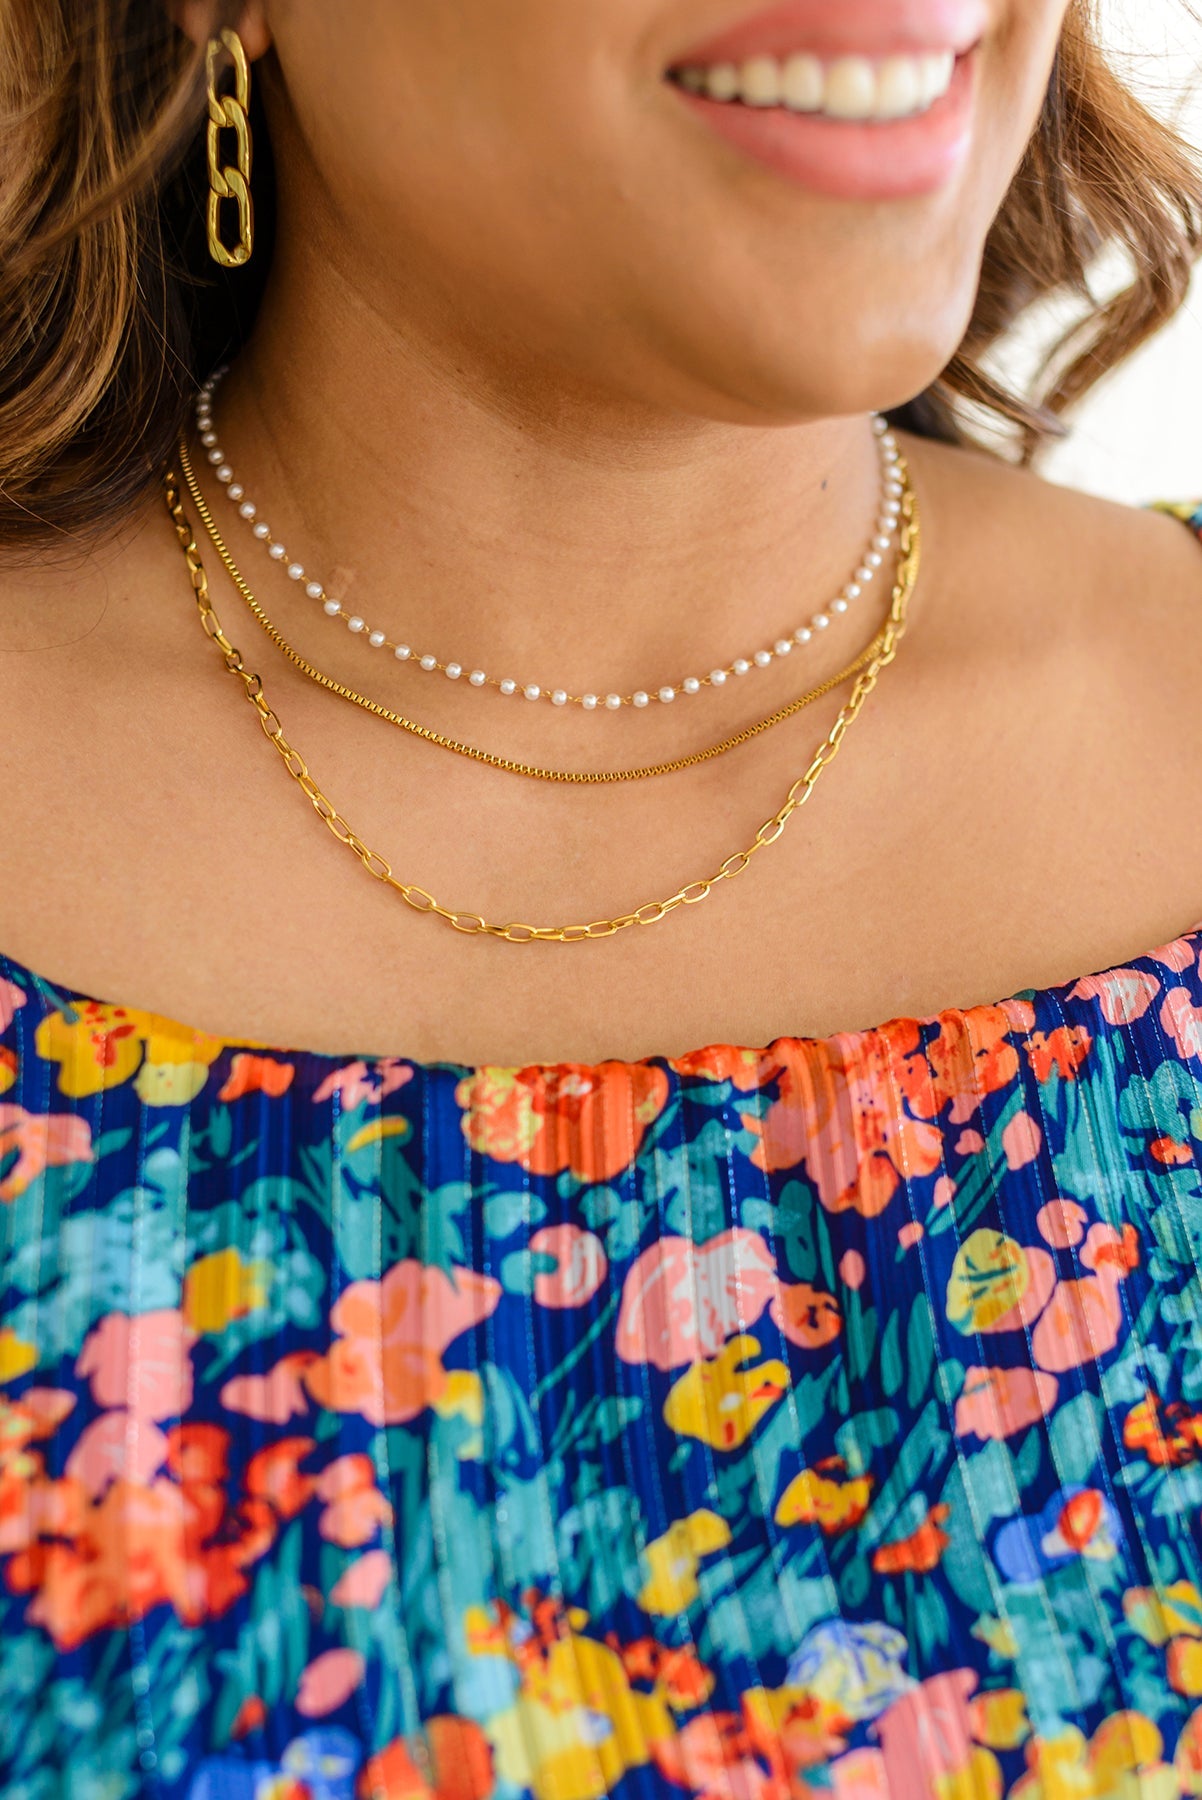 Triple Threat Layered Necklace ~Online Exclusive